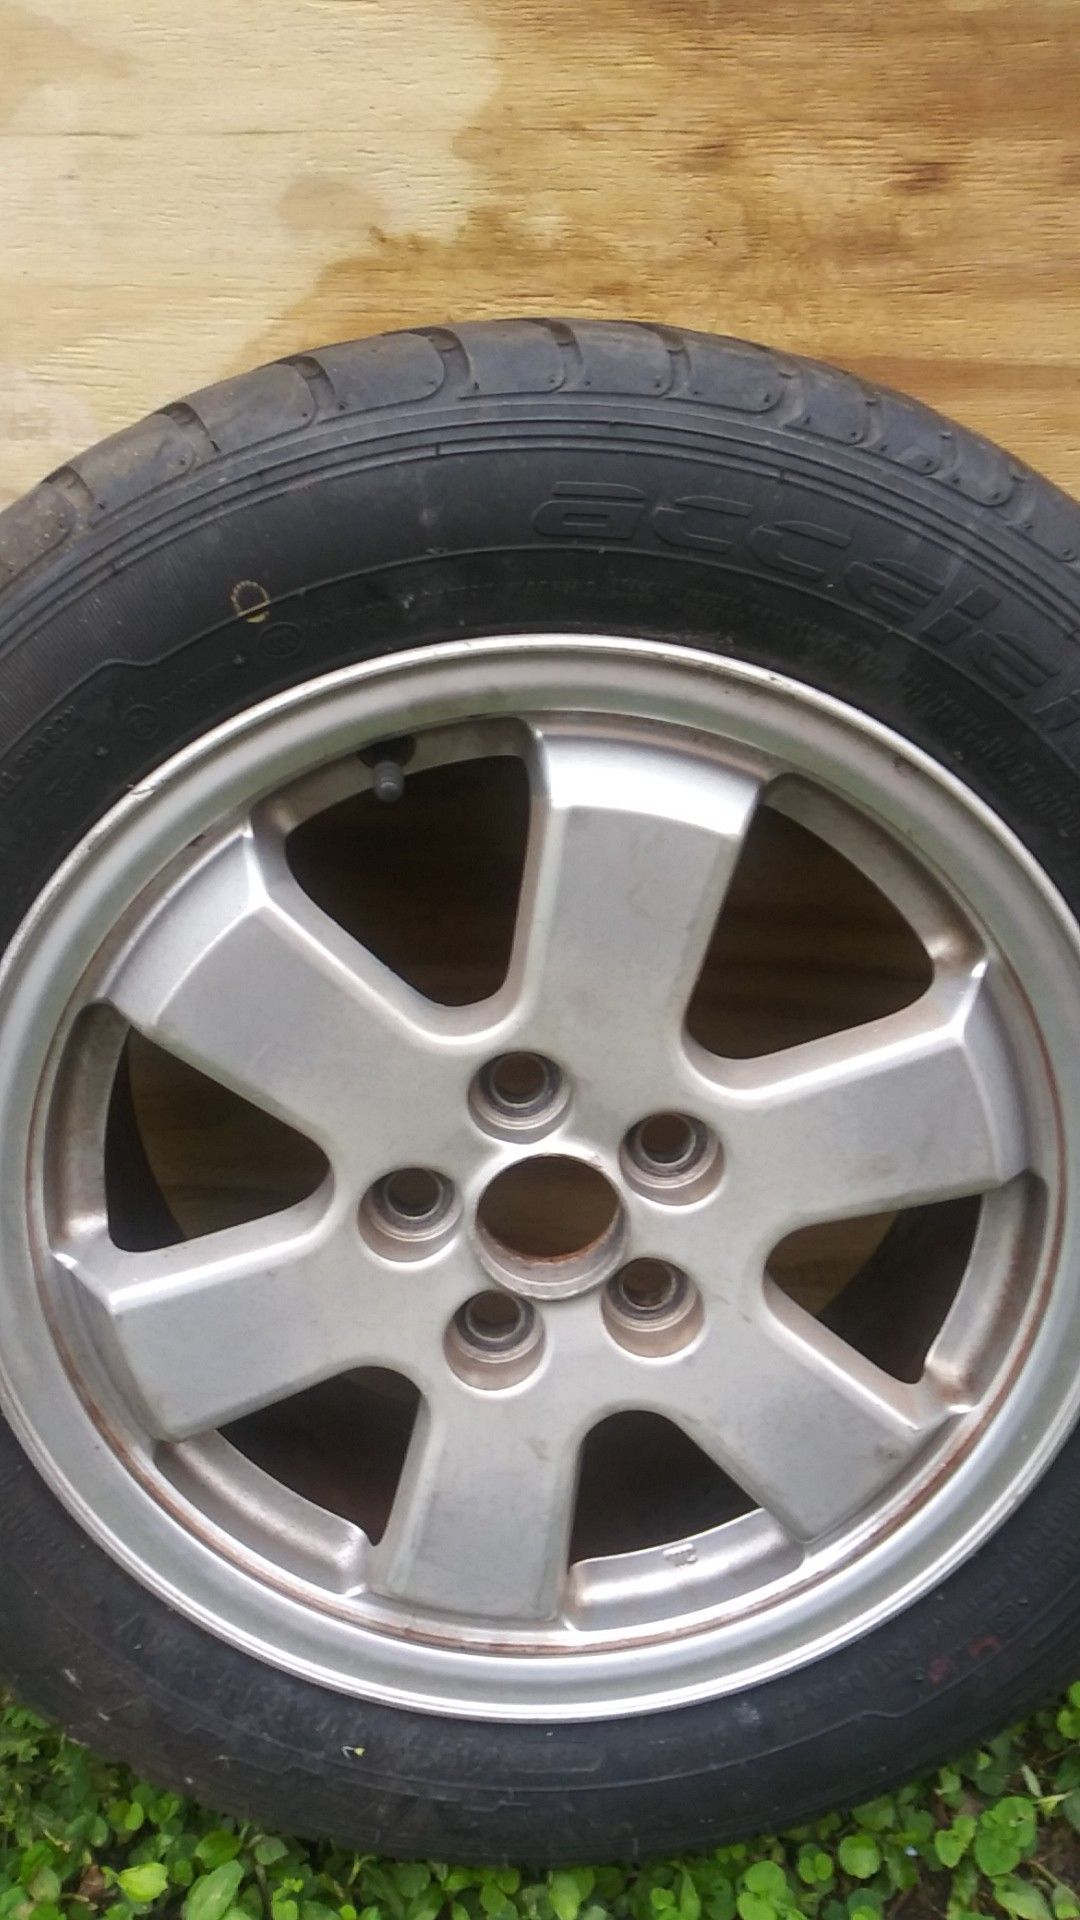 PRIUS rim and good tire for full size spear